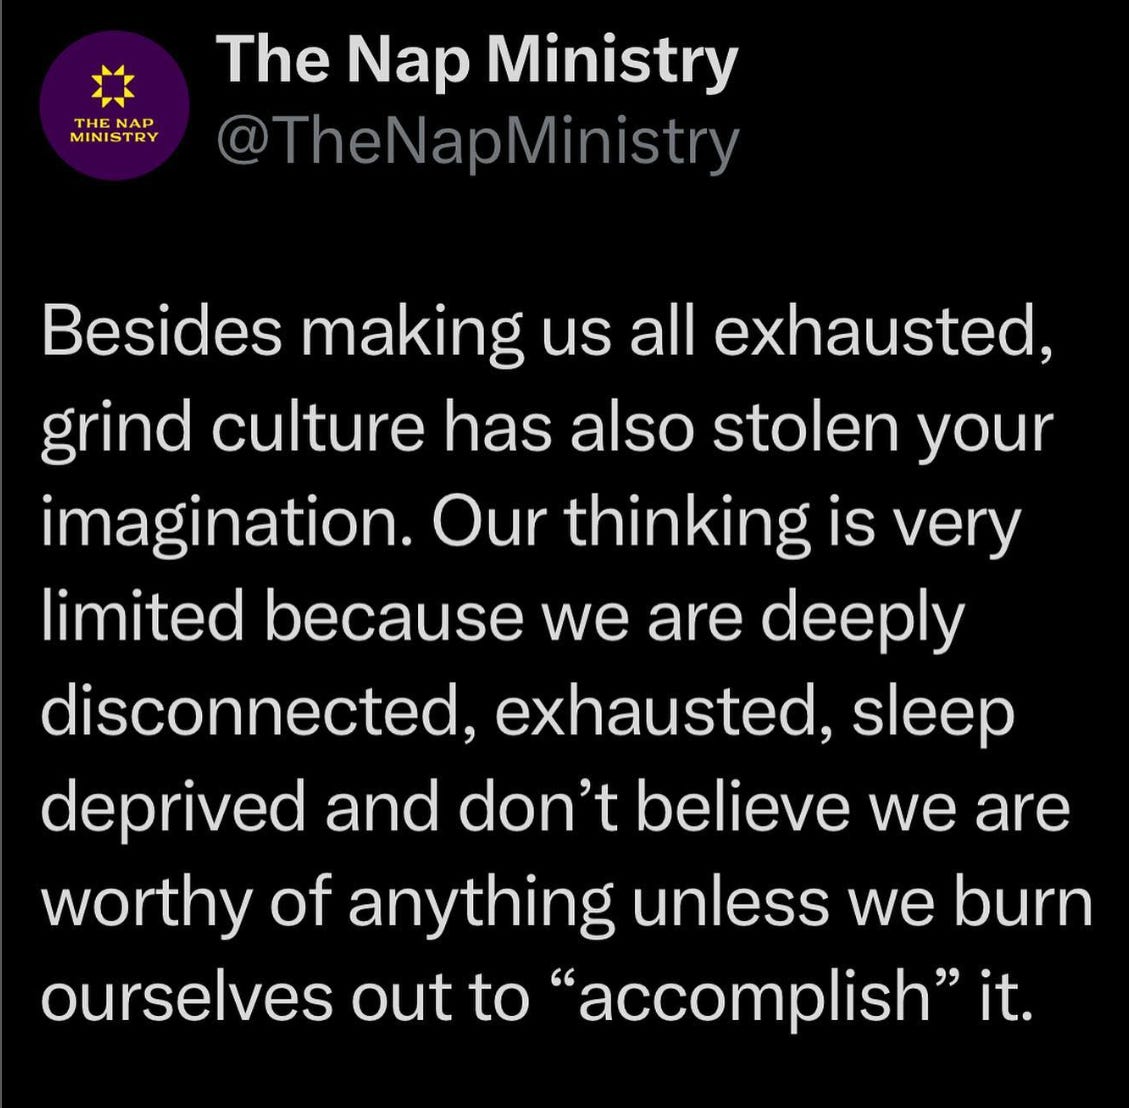 A tweet from @TheNapMinistry. Text: Besides making us all exhausted, grind culture has also stolen your imagination. Our thinking is very limited because we are deeply disconnected, exhausted, sleep deprived and don’t believe we are worthy of anything unless we burn ourselves out to “accomplish” it.